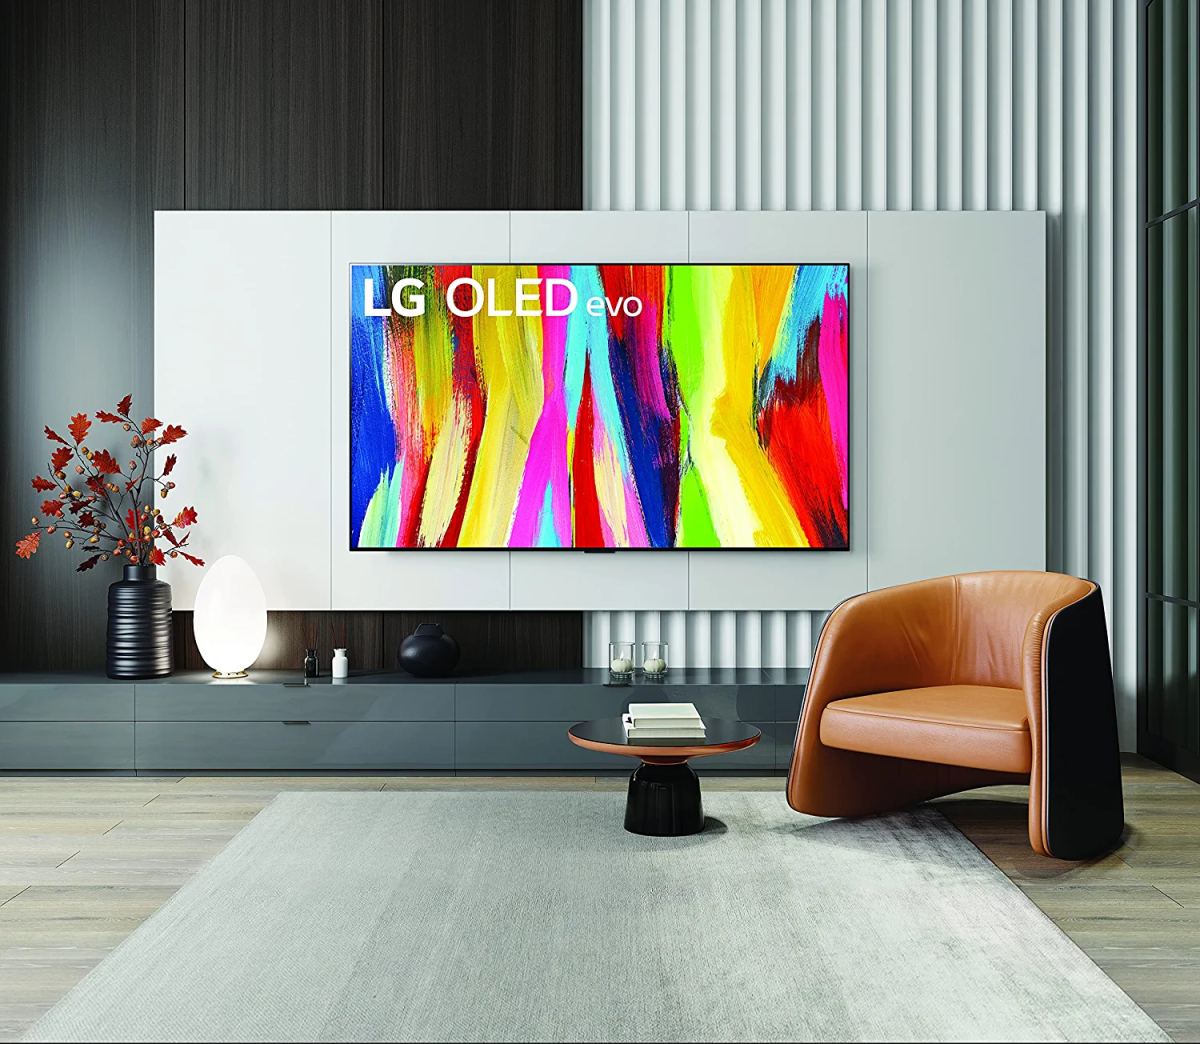 The best 50-inch TV is the one that brings your favorite shows and movies to life, fitting seamlessly into your home and budget.